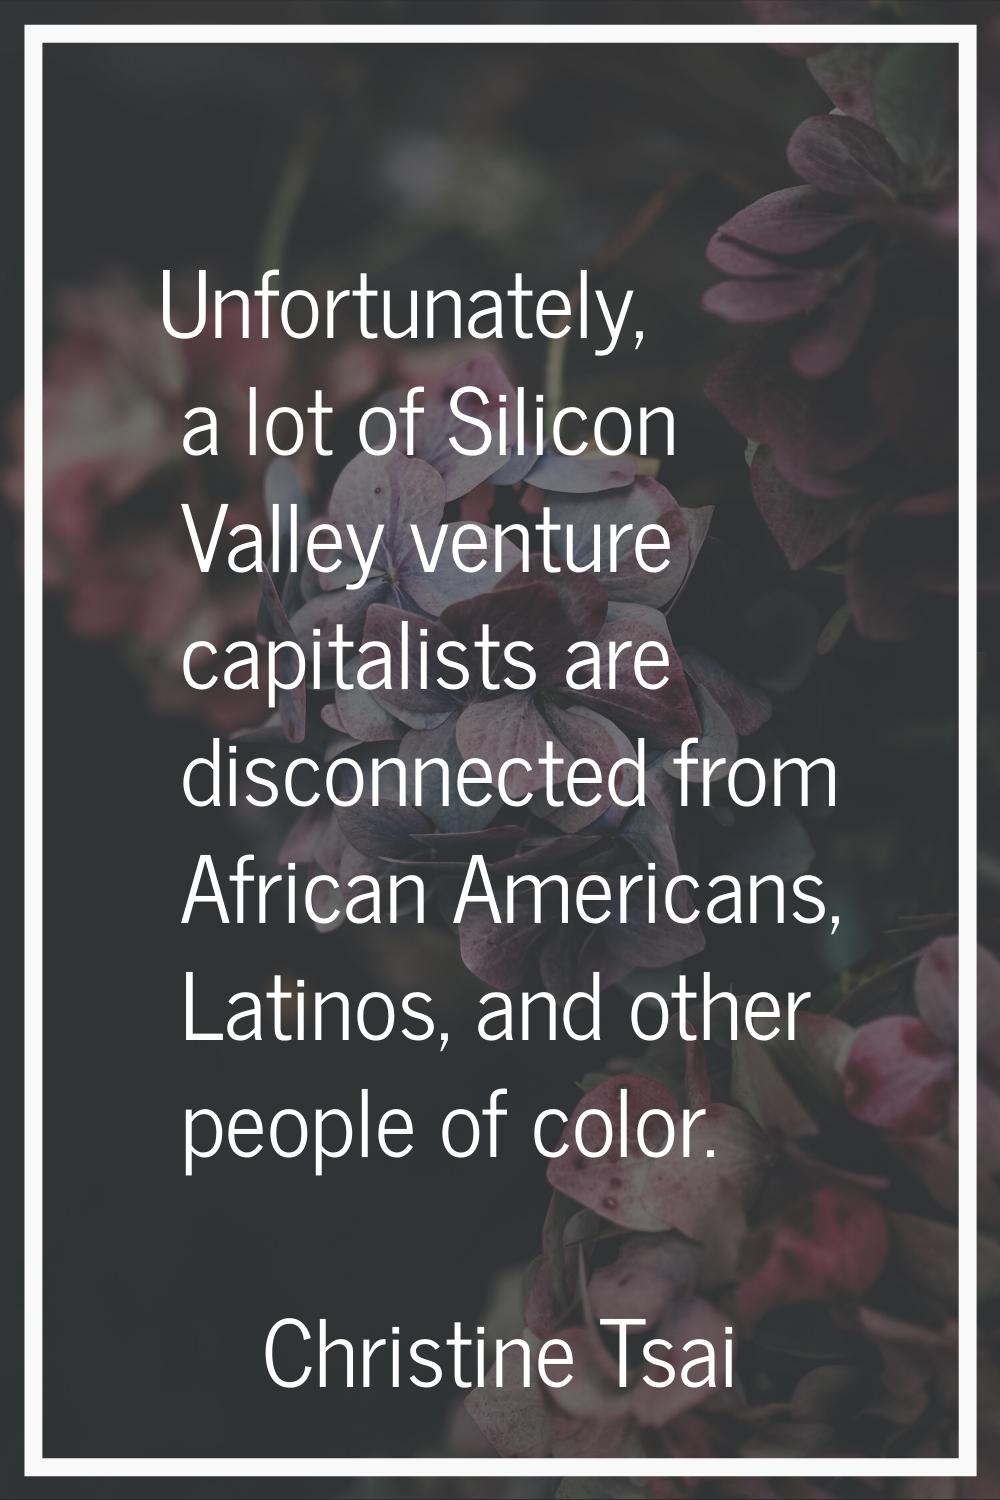 Unfortunately, a lot of Silicon Valley venture capitalists are disconnected from African Americans,